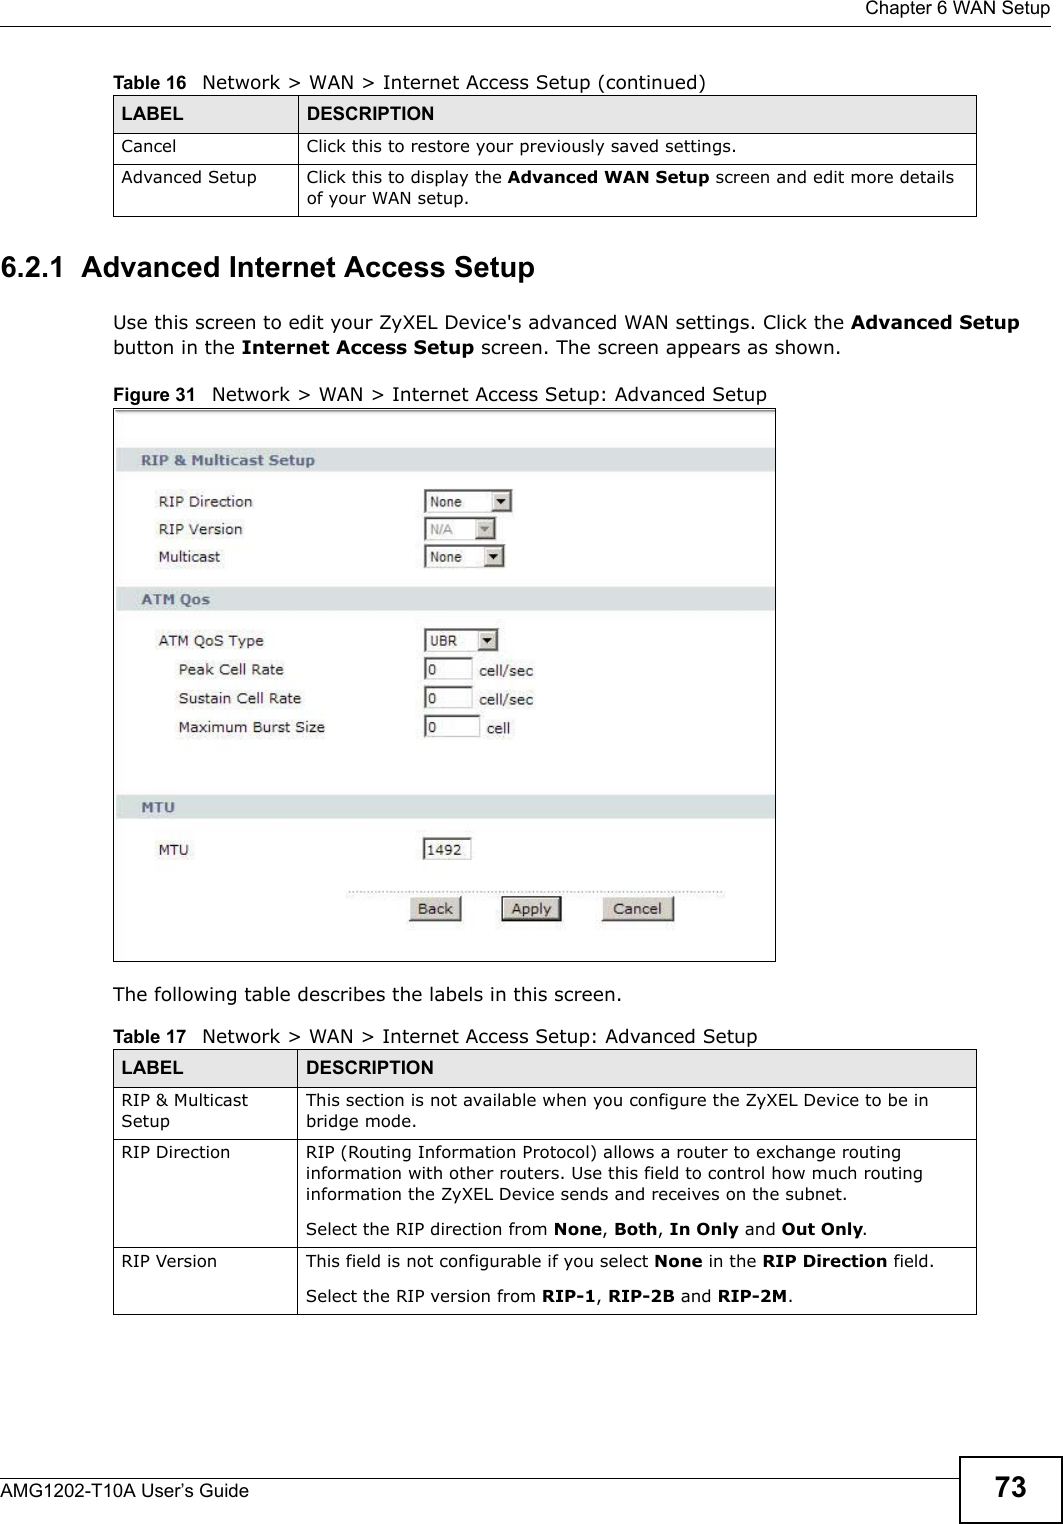  Chapter 6 WAN SetupAMG1202-T10A User’s Guide 736.2.1  Advanced Internet Access Setup Use this screen to edit your ZyXEL Device&apos;s advanced WAN settings. Click the Advanced Setup button in the Internet Access Setup screen. The screen appears as shown.Figure 31   Network &gt; WAN &gt; Internet Access Setup: Advanced SetupThe following table describes the labels in this screen.  Cancel Click this to restore your previously saved settings.Advanced Setup Click this to display the Advanced WAN Setup screen and edit more details of your WAN setup.Table 16   Network &gt; WAN &gt; Internet Access Setup (continued)LABEL DESCRIPTIONTable 17   Network &gt; WAN &gt; Internet Access Setup: Advanced SetupLABEL DESCRIPTIONRIP &amp; Multicast SetupThis section is not available when you configure the ZyXEL Device to be in bridge mode.RIP Direction RIP (Routing Information Protocol) allows a router to exchange routing information with other routers. Use this field to control how much routing information the ZyXEL Device sends and receives on the subnet.Select the RIP direction from None, Both, In Only and Out Only.RIP Version This field is not configurable if you select None in the RIP Direction field.Select the RIP version from RIP-1, RIP-2B and RIP-2M.